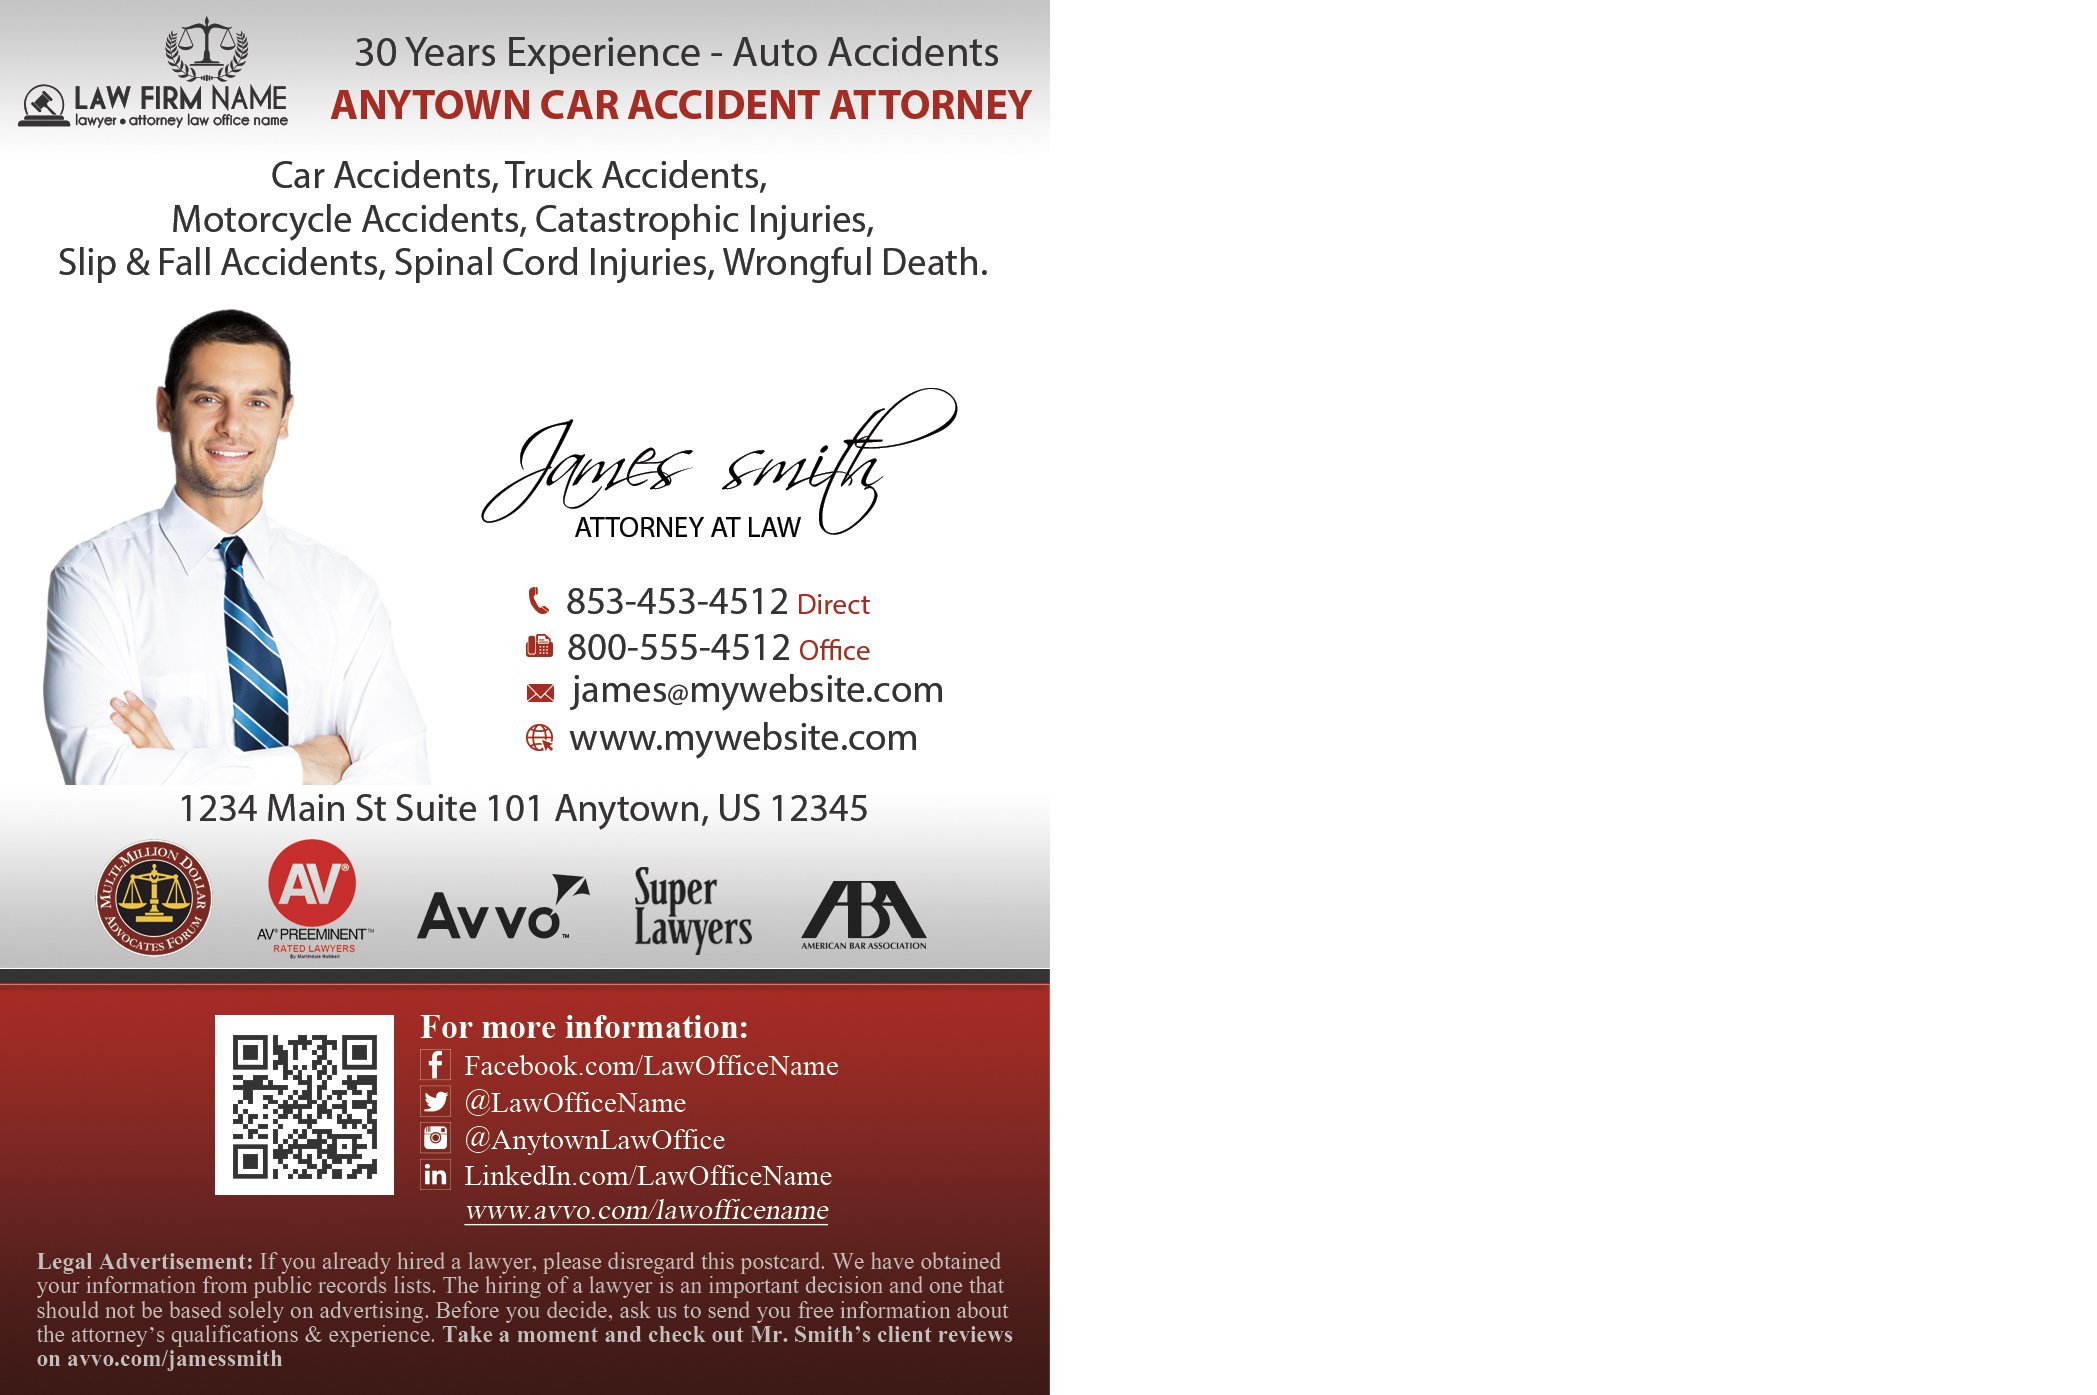 Lawyer Postcards, Law Firm Postcards, Attorney Postcards, Legal Postcards, Law Office Postcards, DUI Postcards, Auto Accidents Postcards, Car Accident Postcards, Wrongful Death Postcards